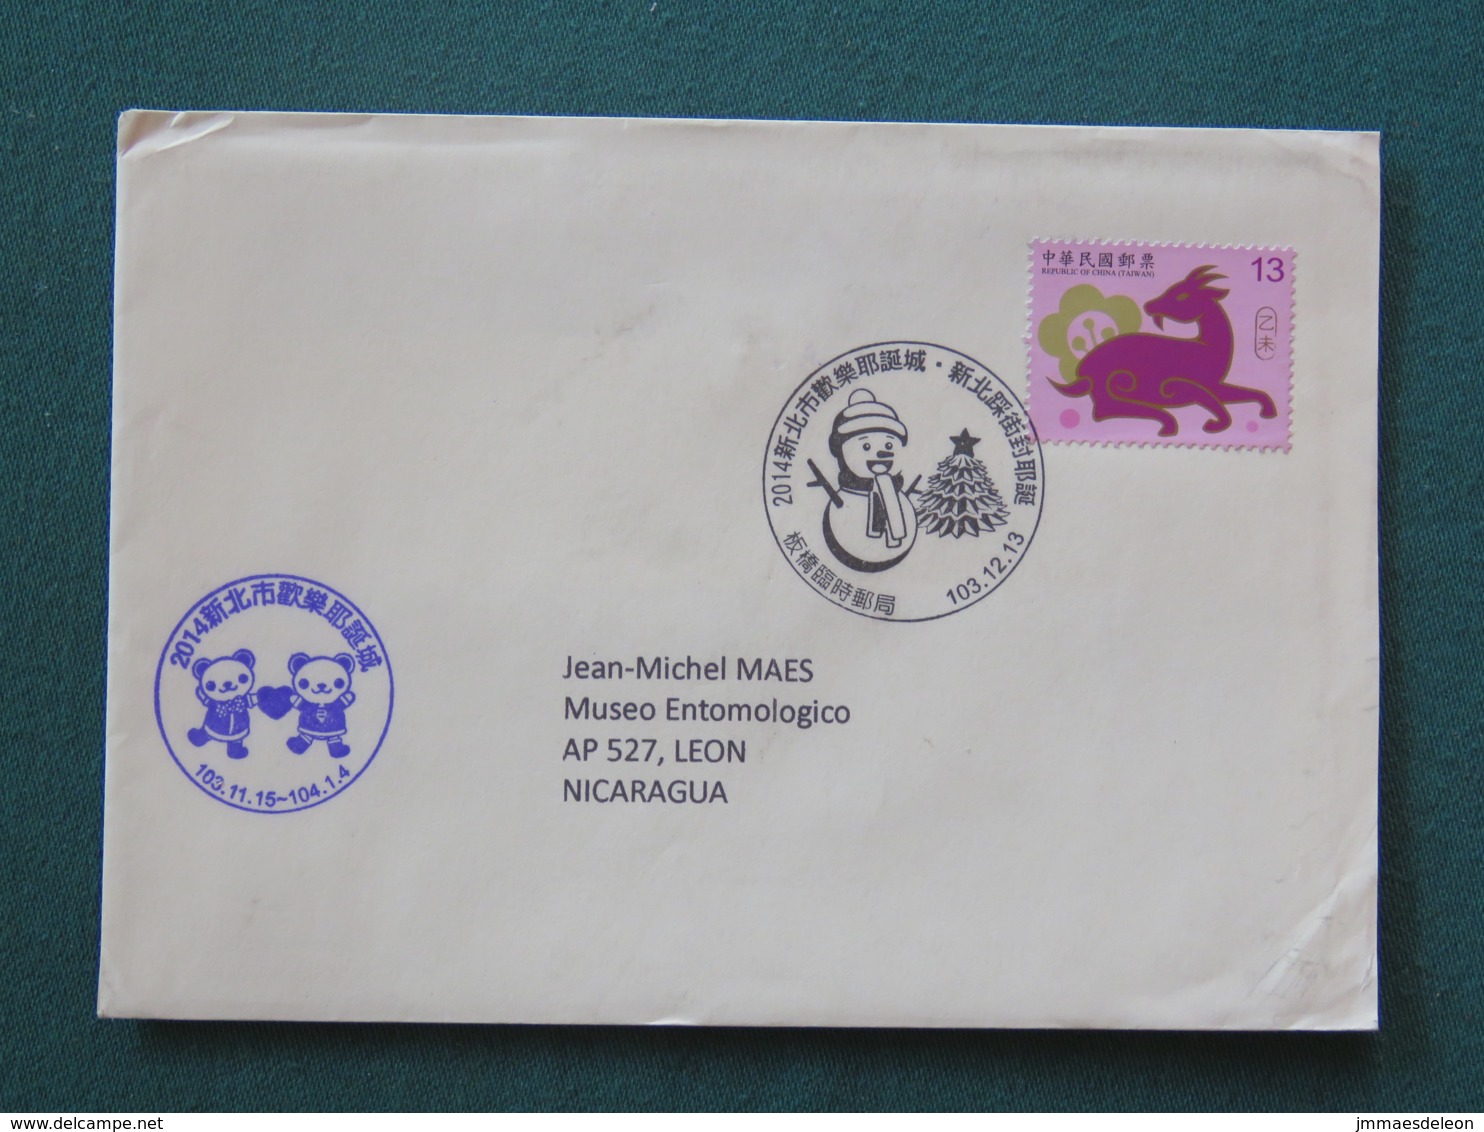 Taiwan 2015 Cover To Nicaragua - Year Of The Goat - Snowman Cancel - Panda Cancel - Covers & Documents